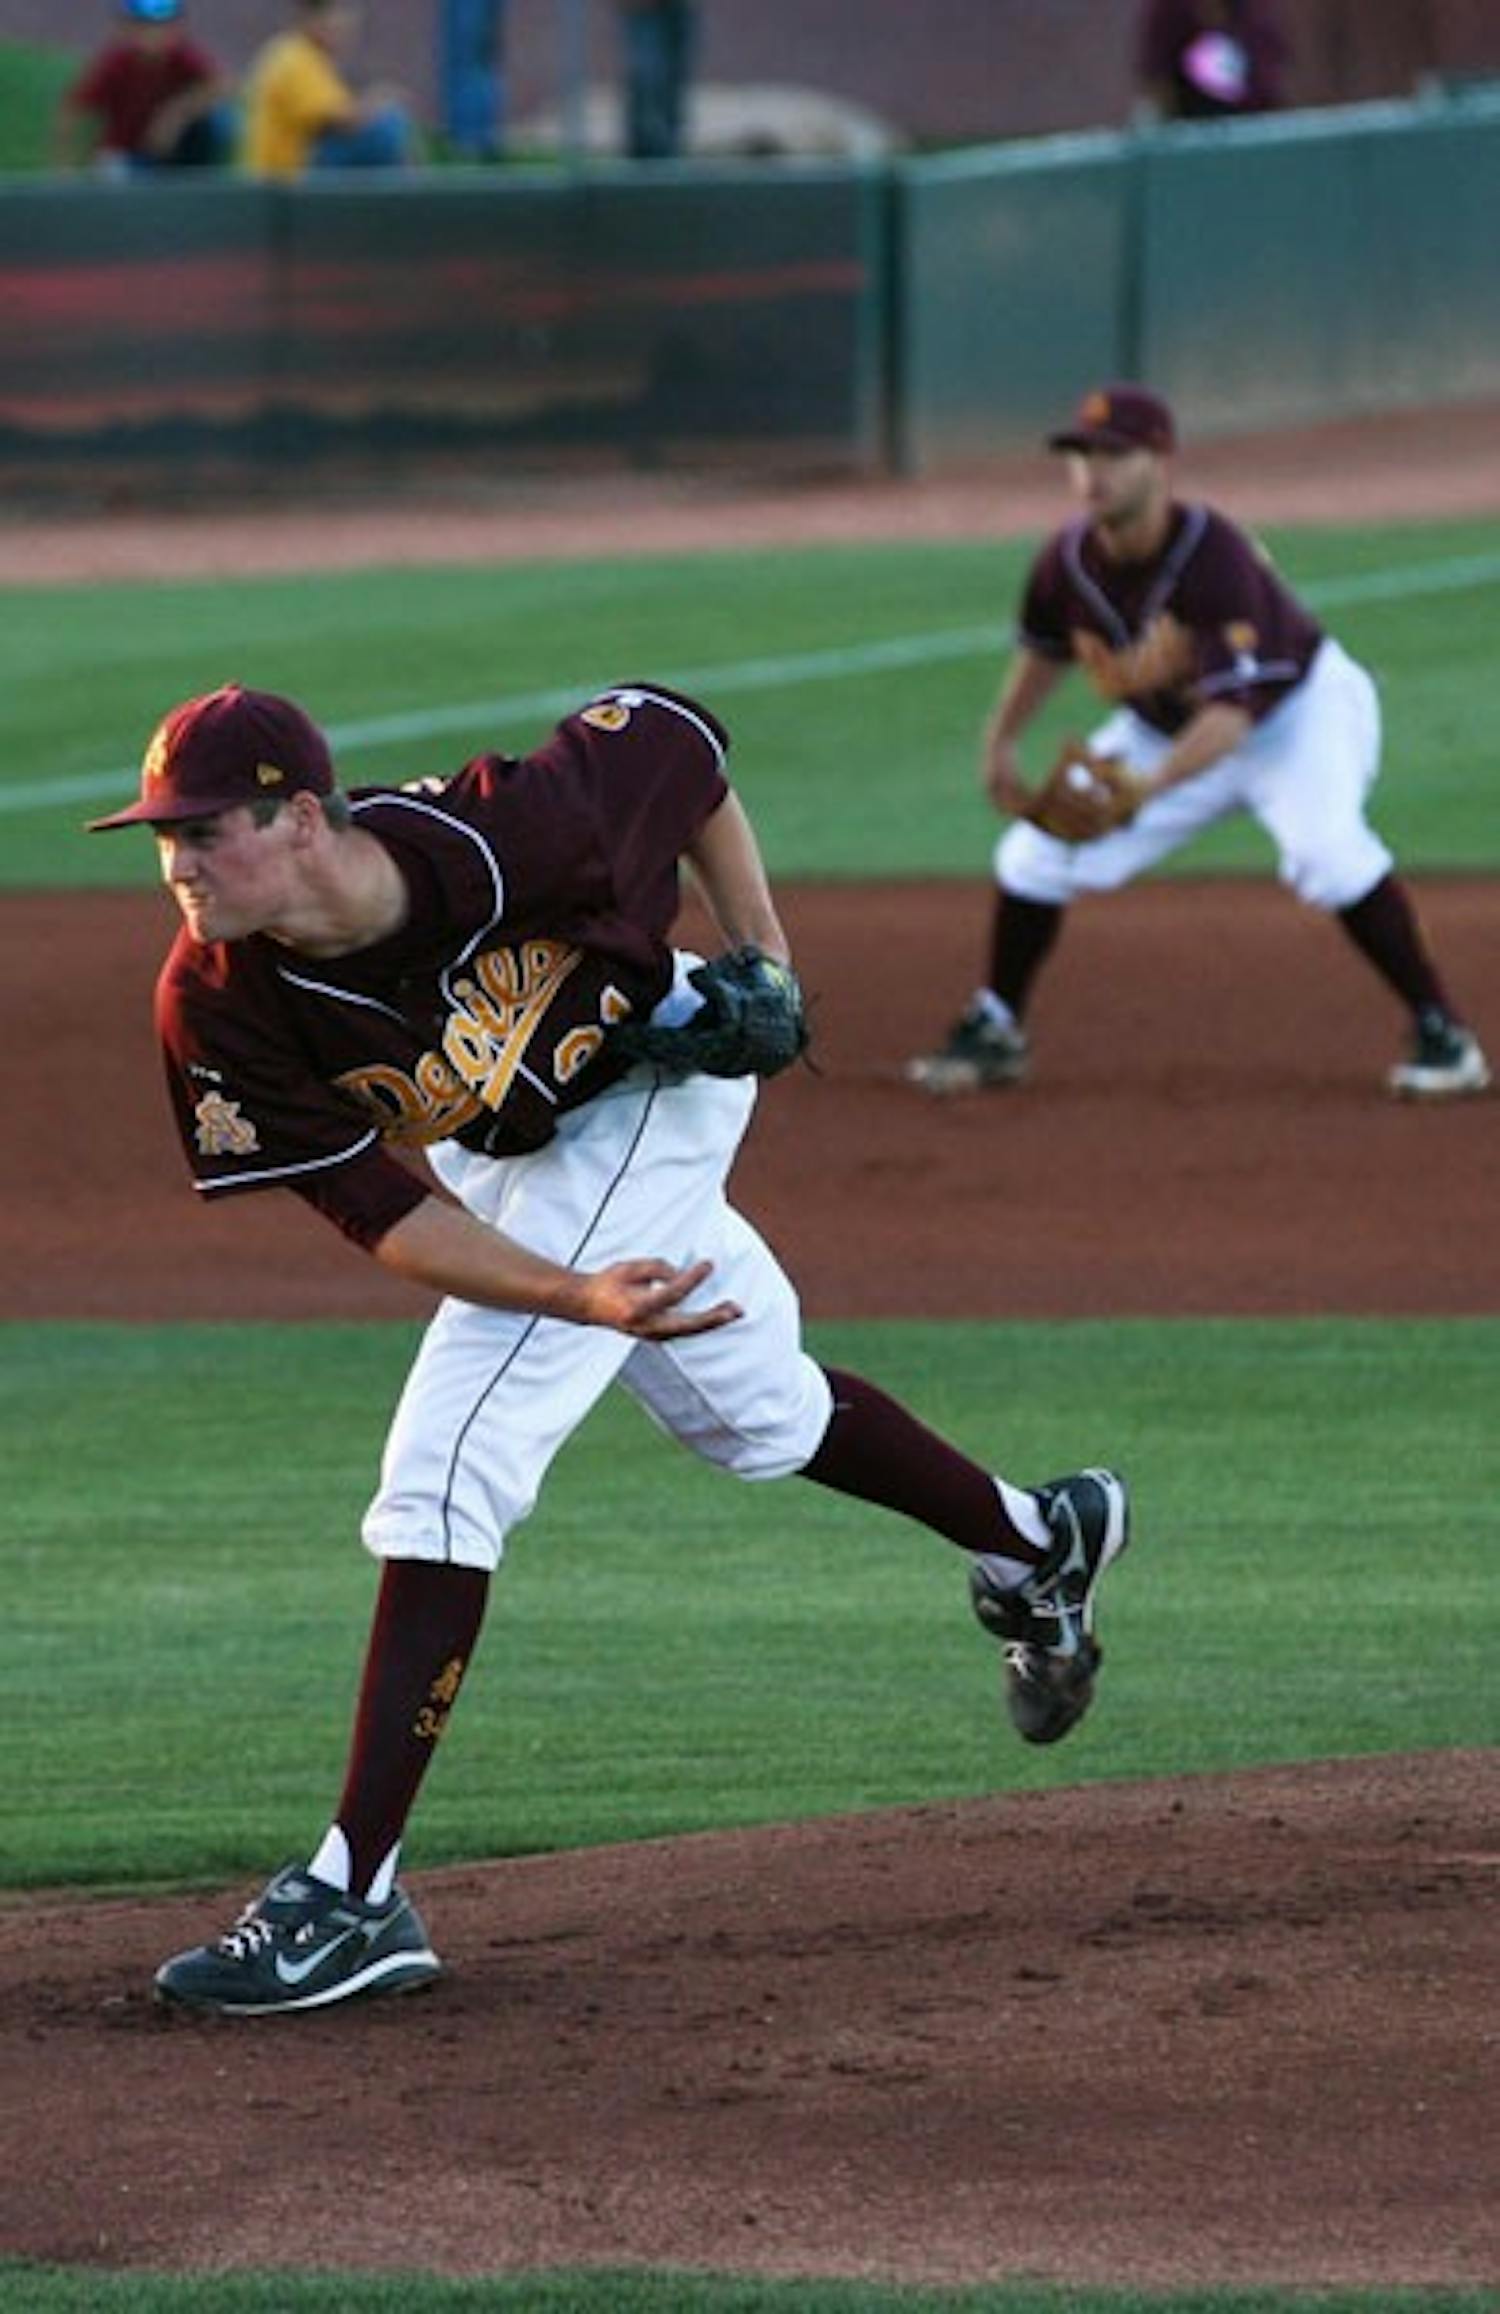 Ready to go: ASU junior Kramer Champlin releases a pitch against WSU on April 17. Champlin is expected to start on Saturday against No. 25 Stanford. (Photo by Lisa Bartoli)